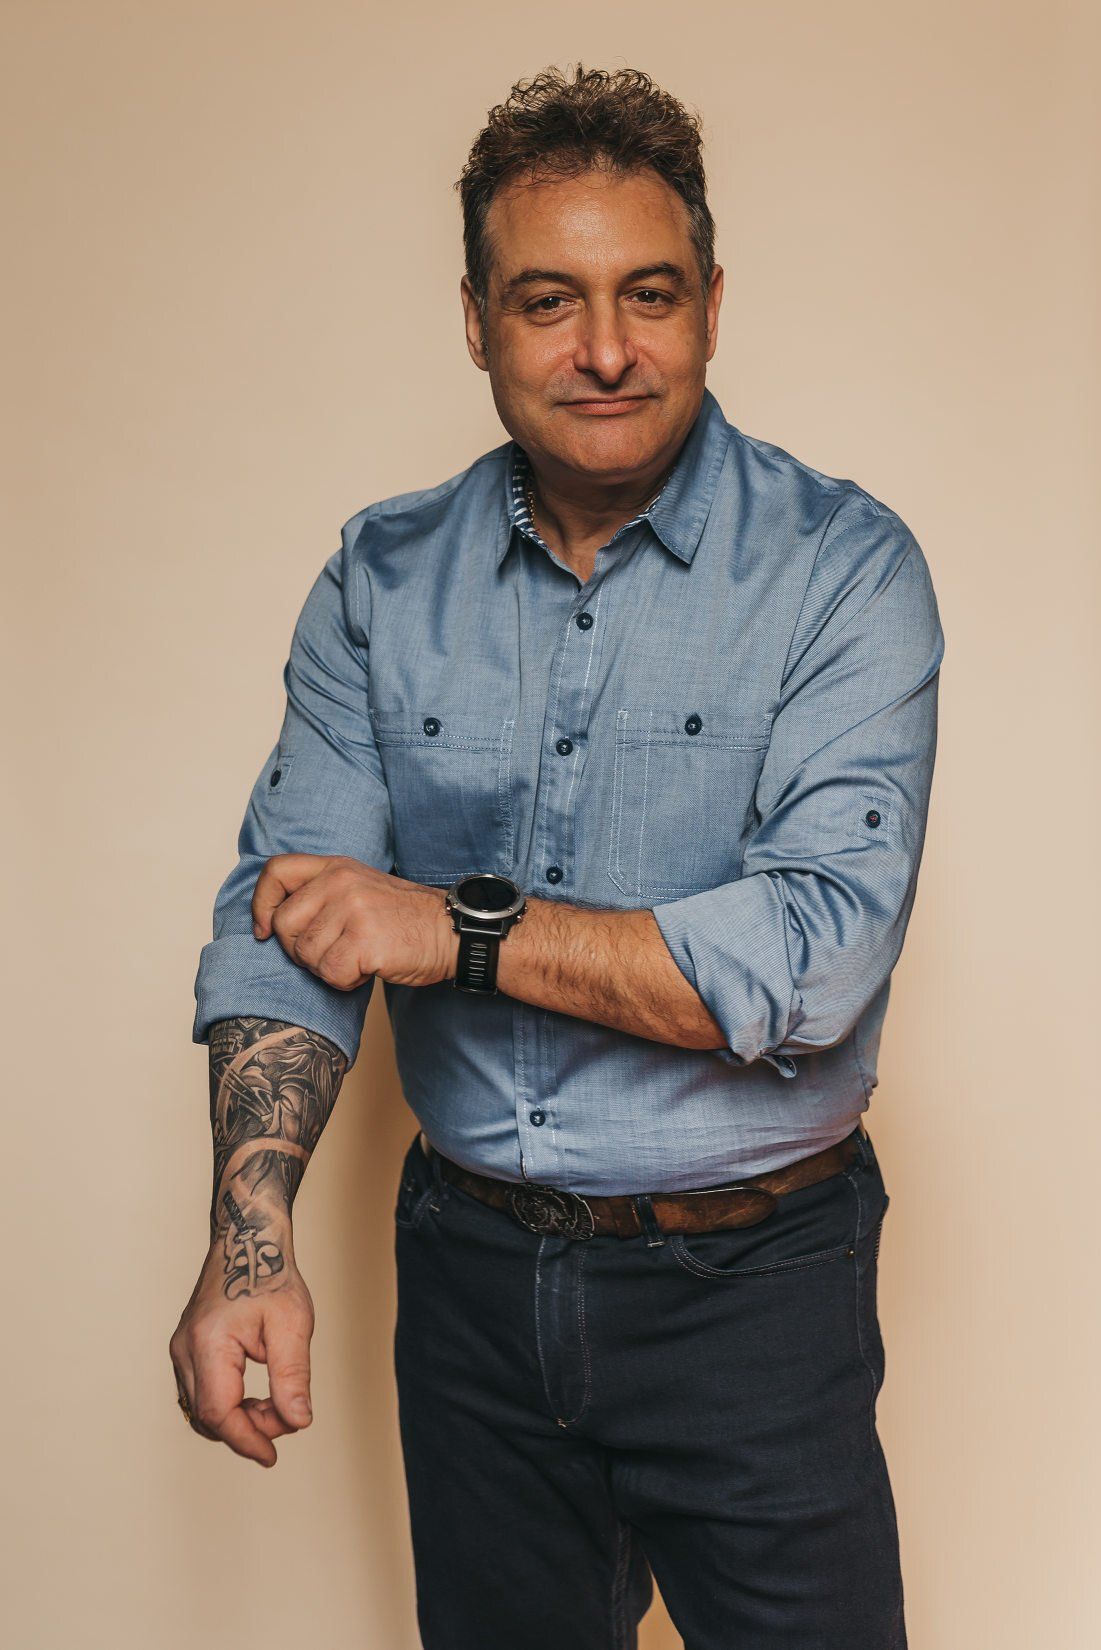 A male business owner rolling up his shirt sleeve exposing a tattooed arm in a professional headshot photo